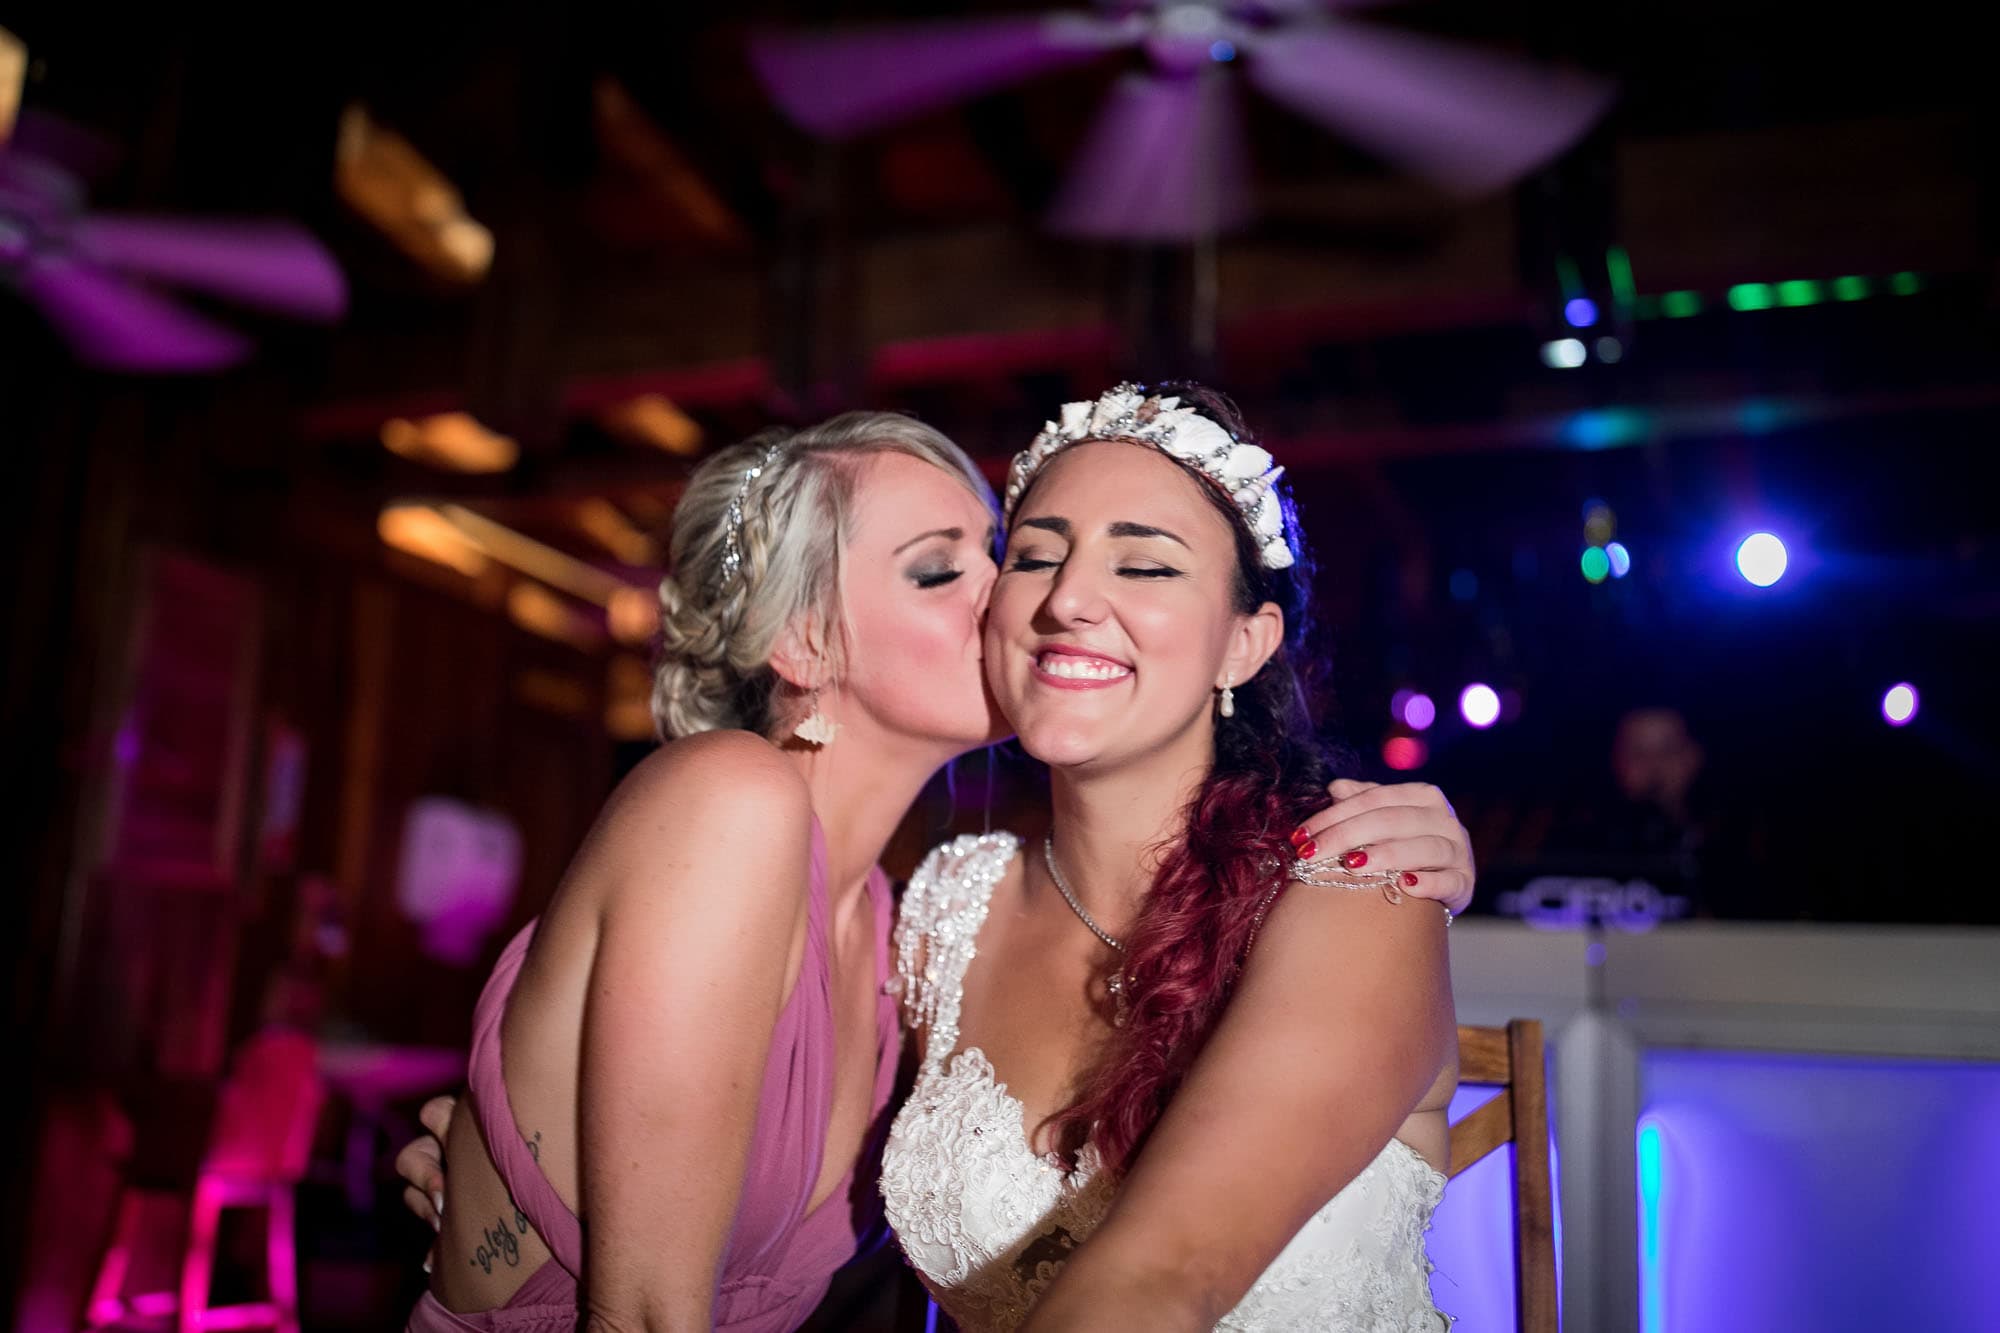 Love blooms as they have fun at the reception